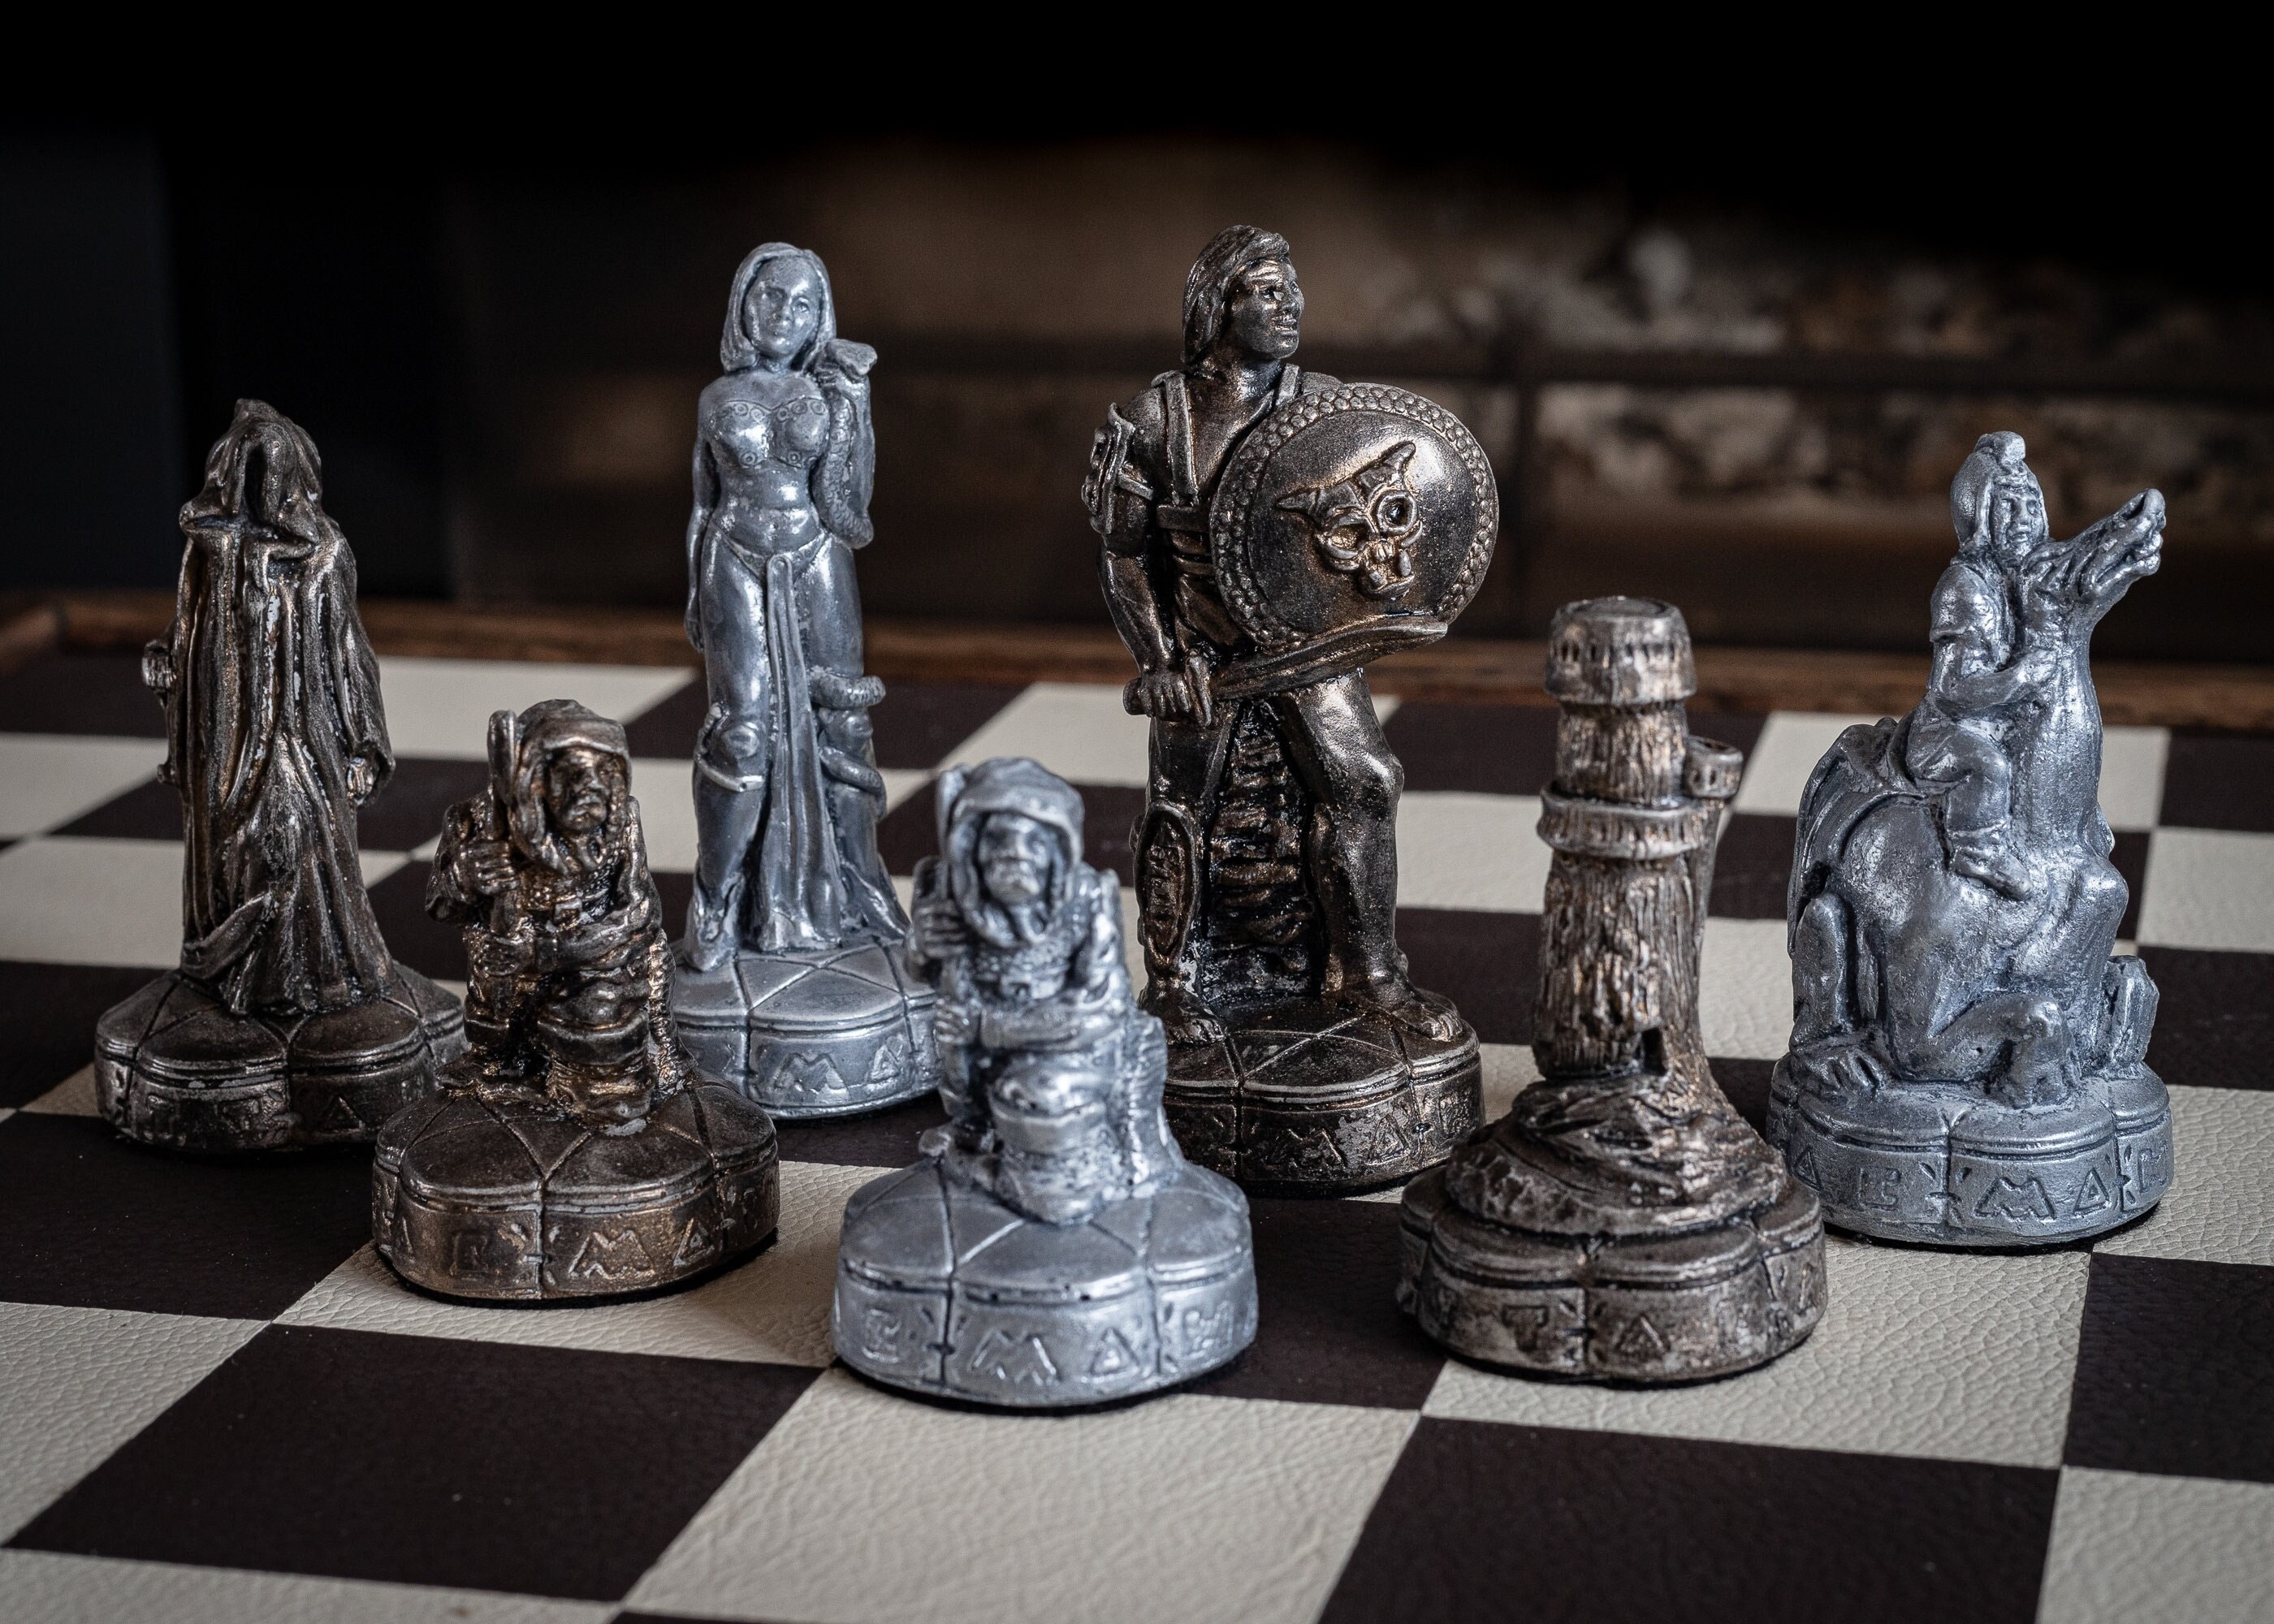 SparkChess - Fancy a game of chess with me?